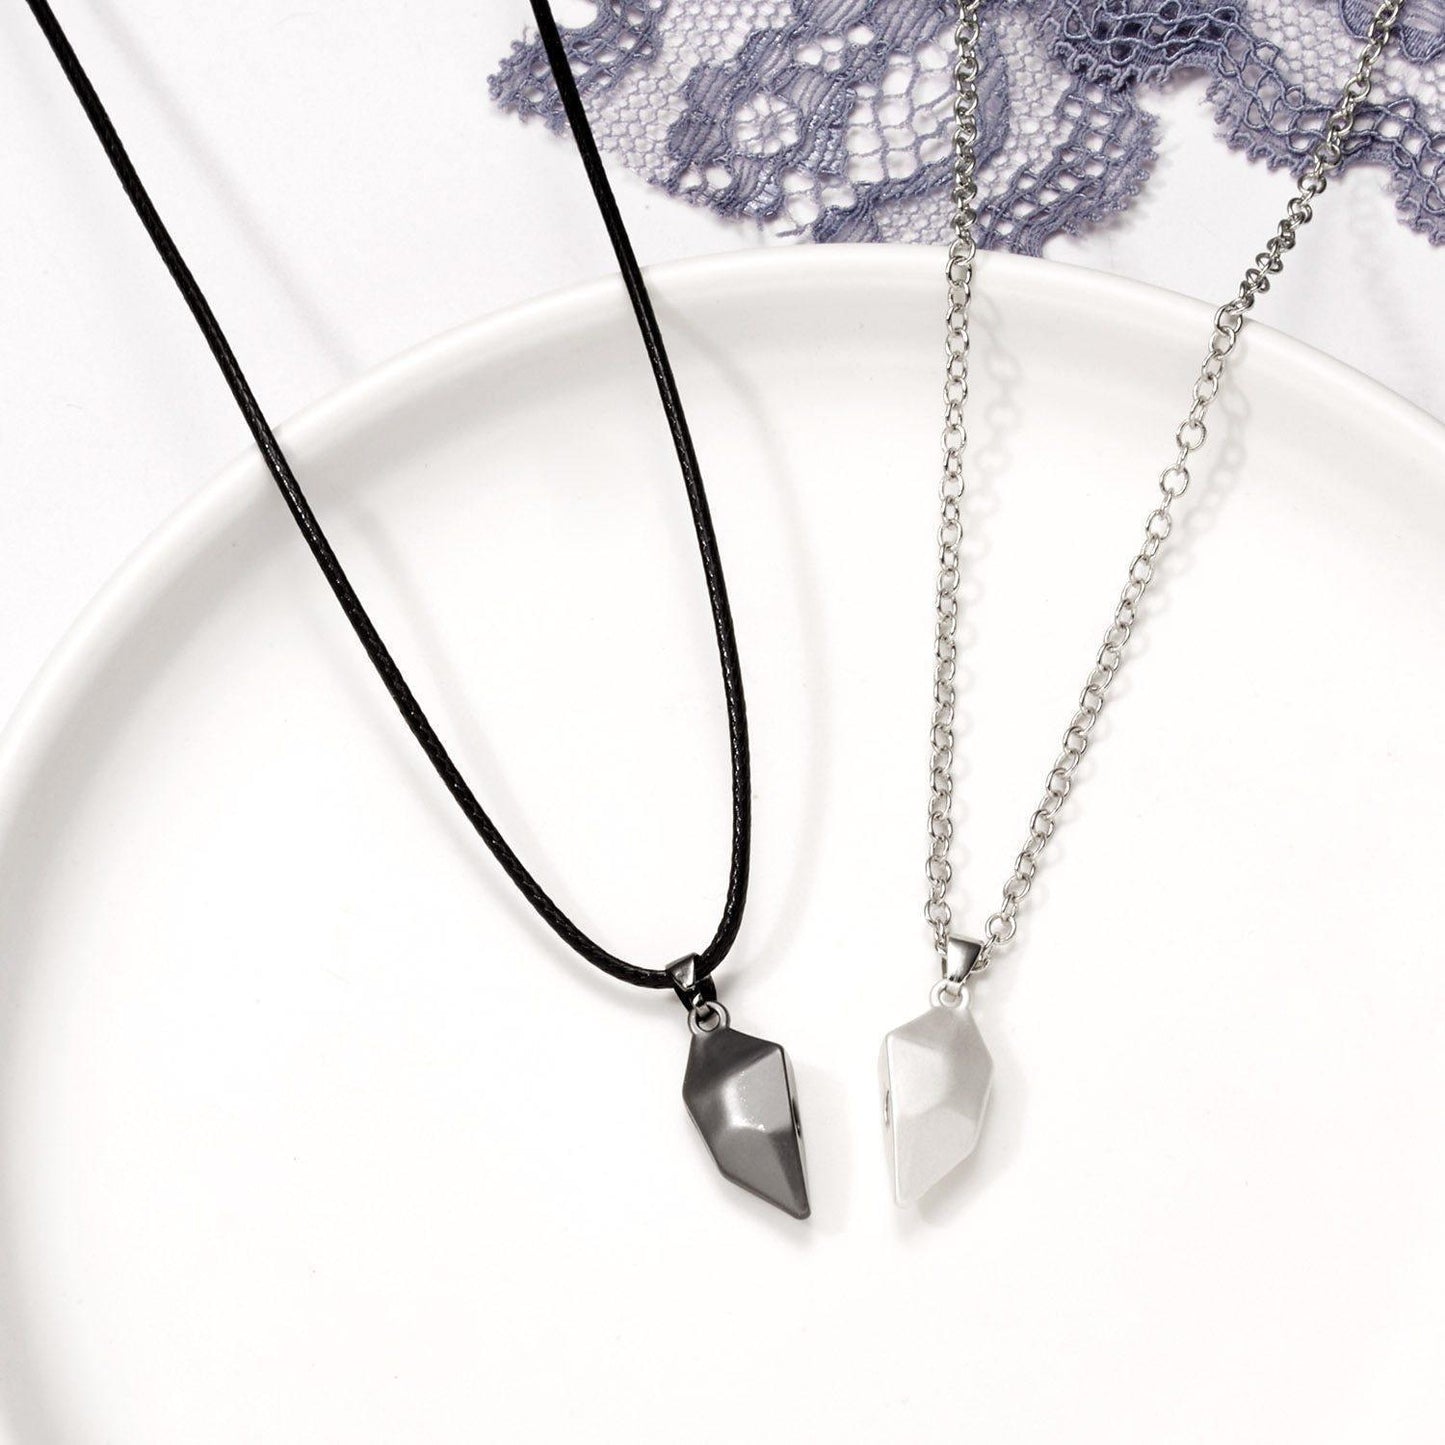 Magnetic Best Friend Necklace For 2 in 2023 | Magnetic Best Friend Necklace For 2 - undefined | best friend necklace for 2, best friend necklaces magnetic, Friendship Pendant Necklaces, gift ideas for Best Friends, Magnetic Friendship necklace, Magnetic heart Necklace, To My Best Friend Friendship Gift Necklace Set | From Hunny Life | hunnylife.com